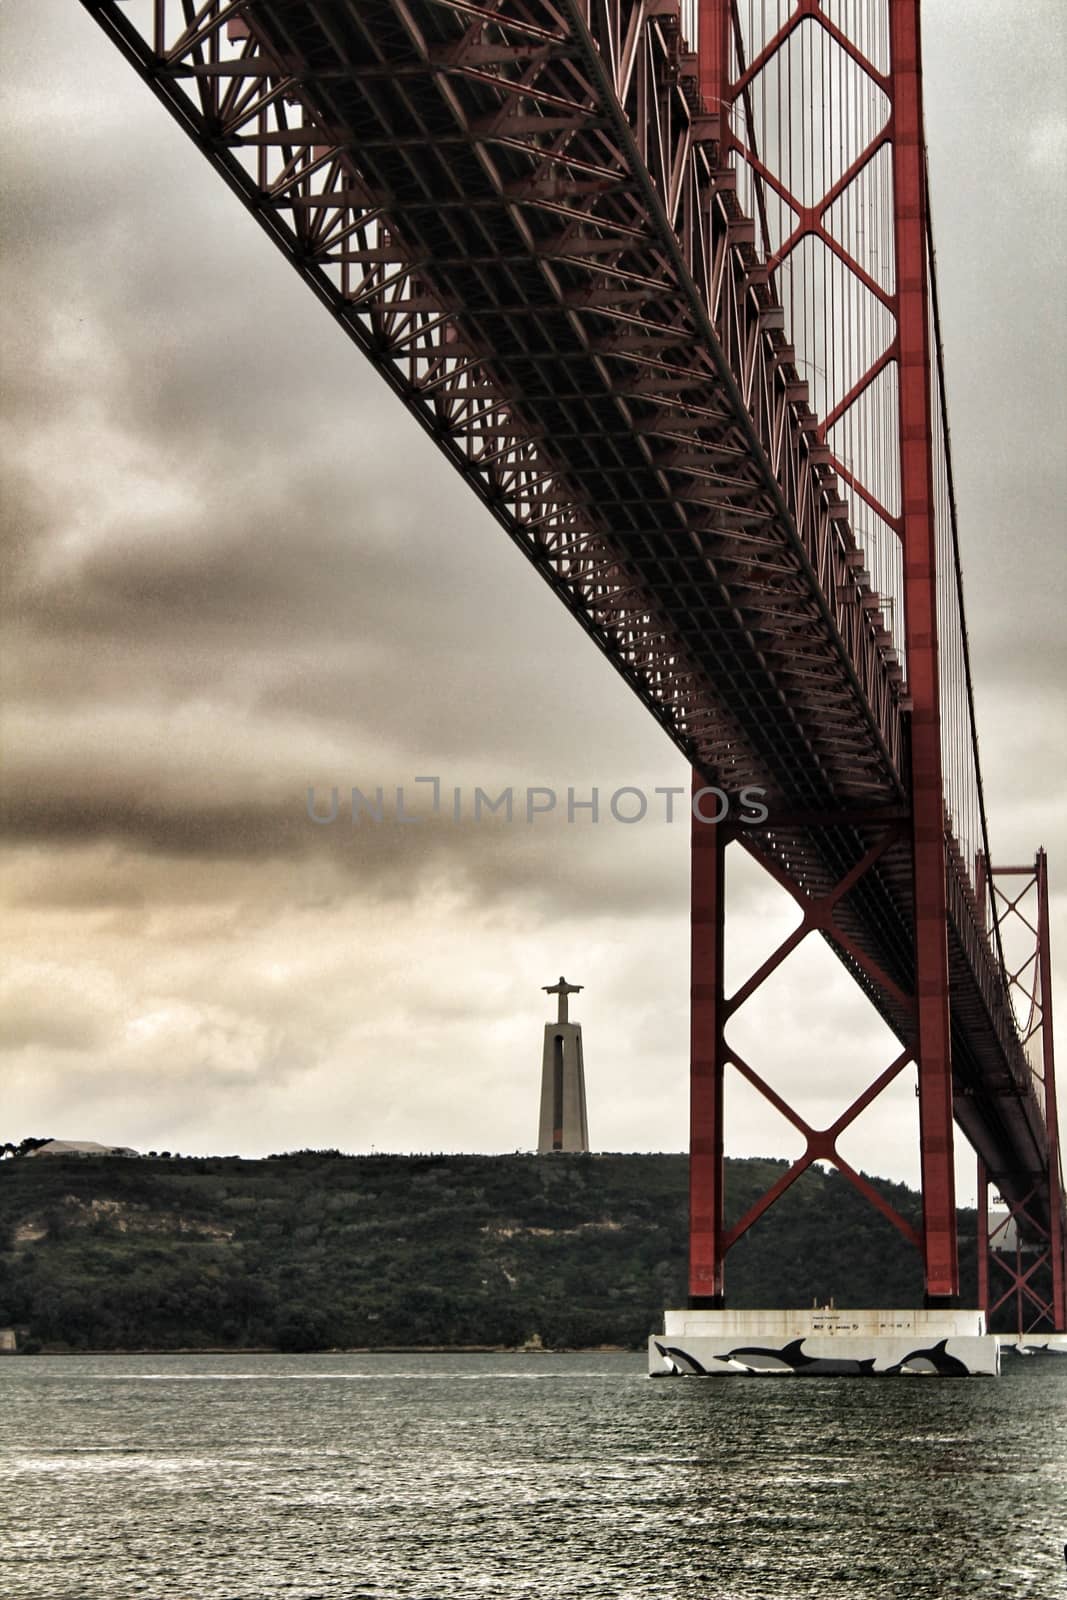 Banks of the river Tagus in Lisbon in Spring on a cloudy day. Beautiful 25th April bridge structure.